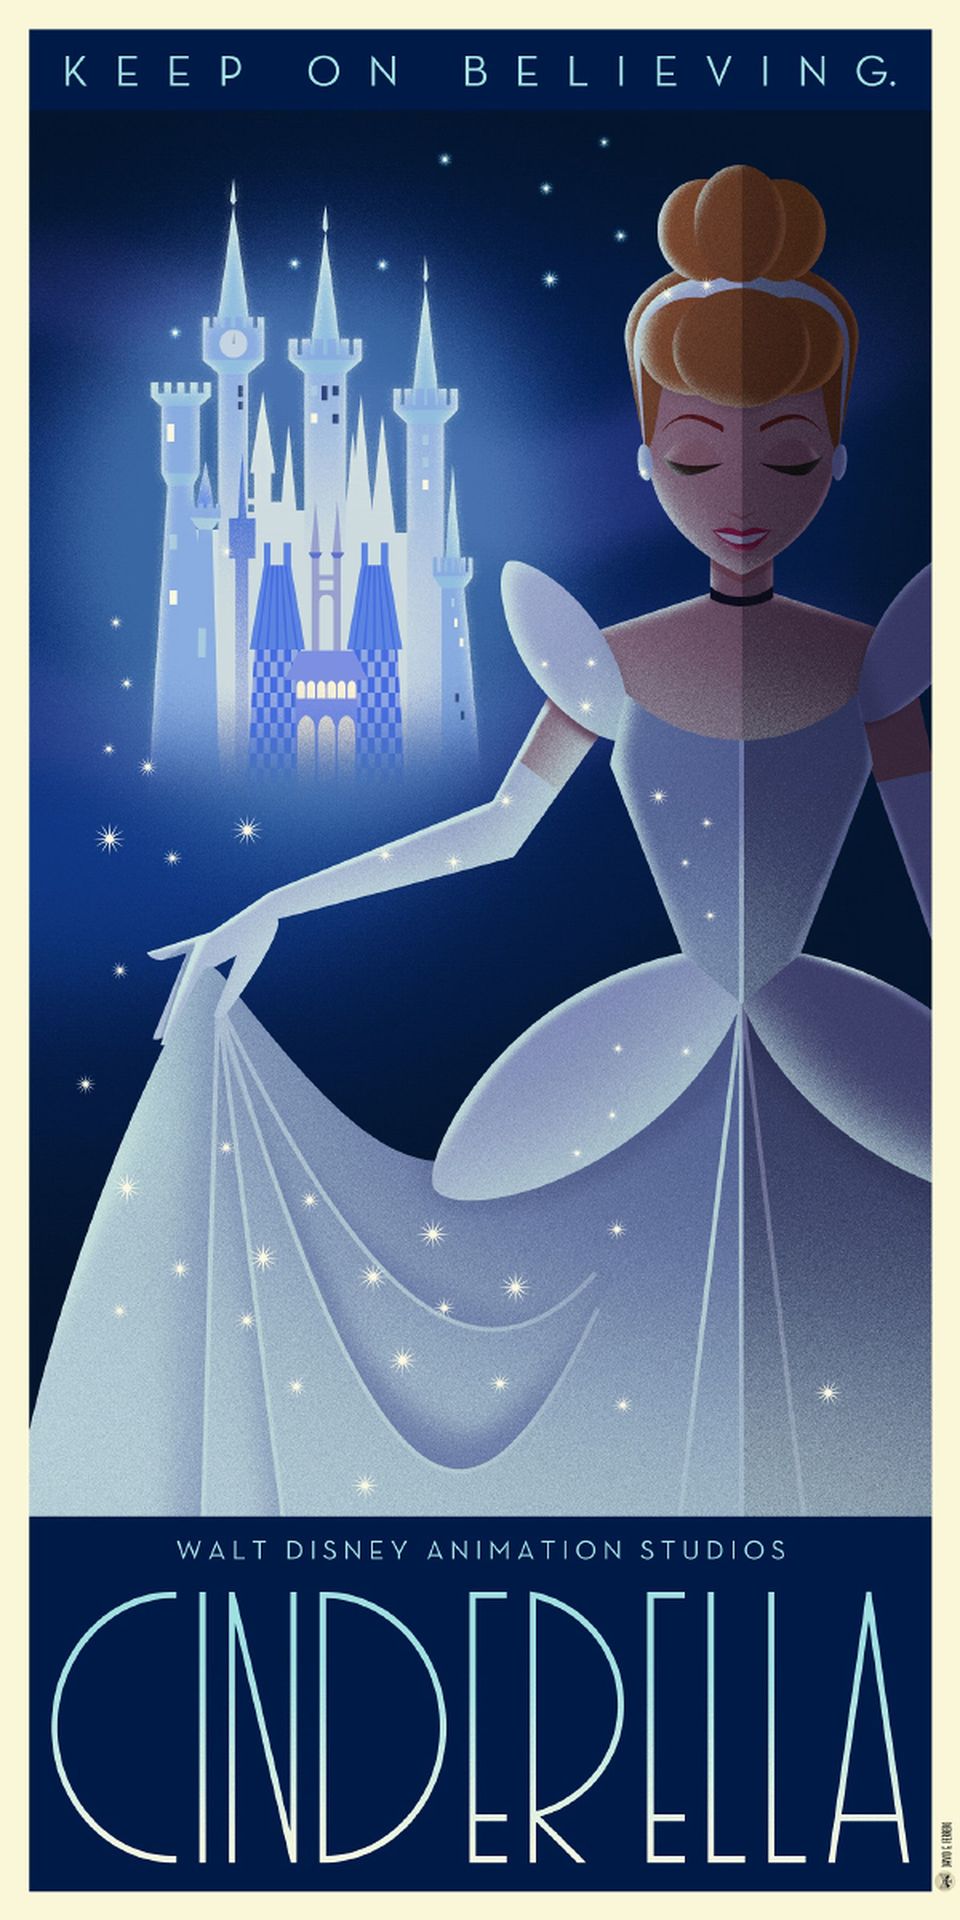 these-12-amazing-art-deco-disney-posters-bring-a-whole-new-world-of-20s-glamour-624690